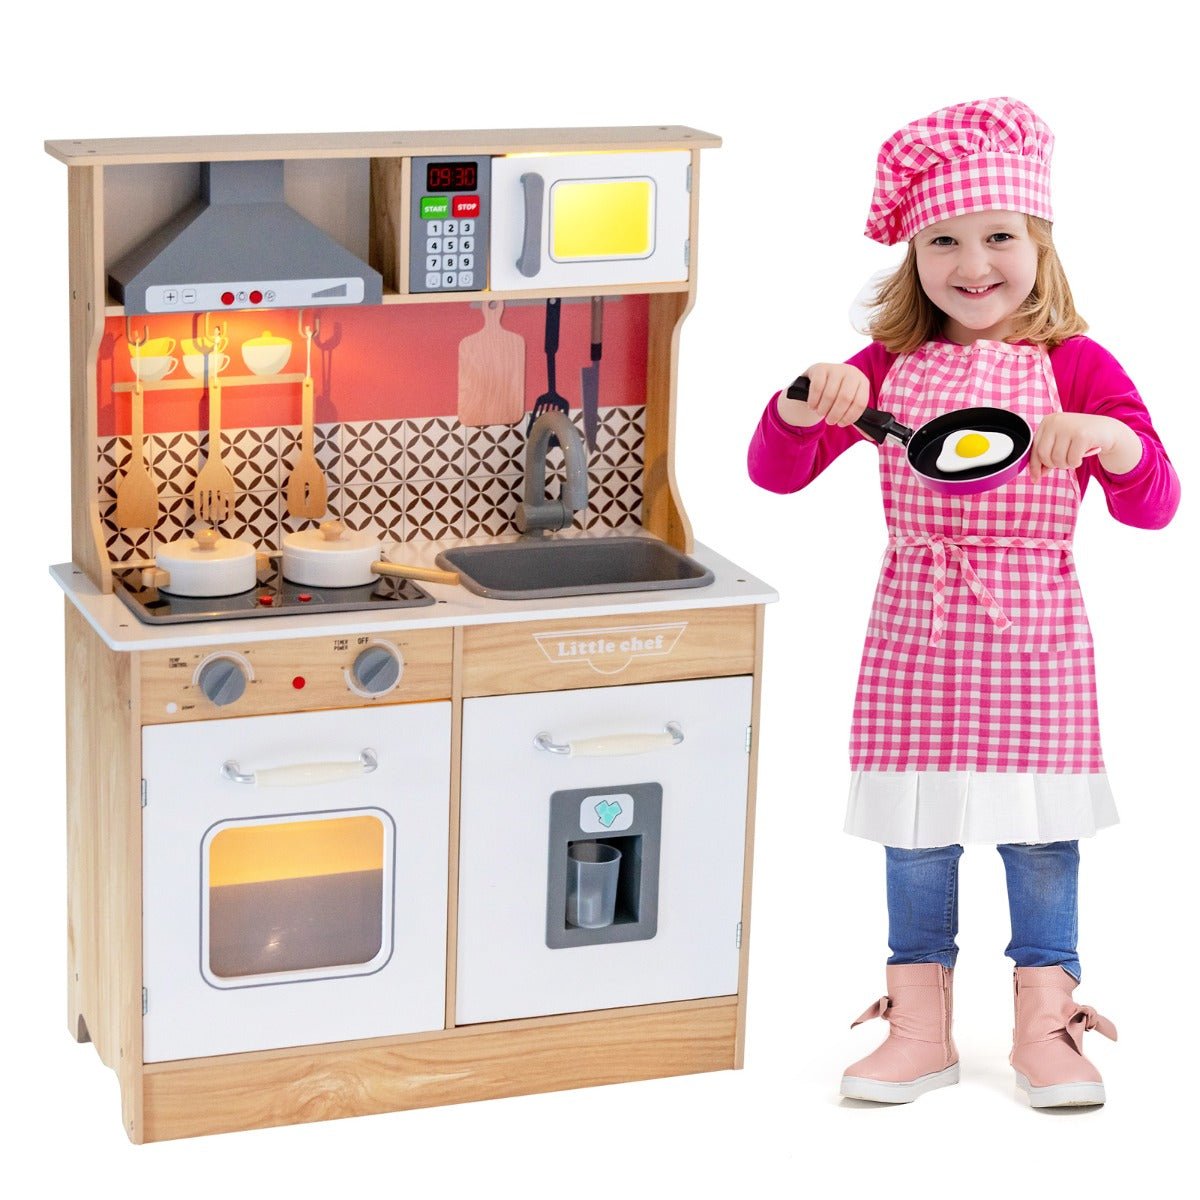 Explore Culinary Delights with Wooden Kids Kitchen Set